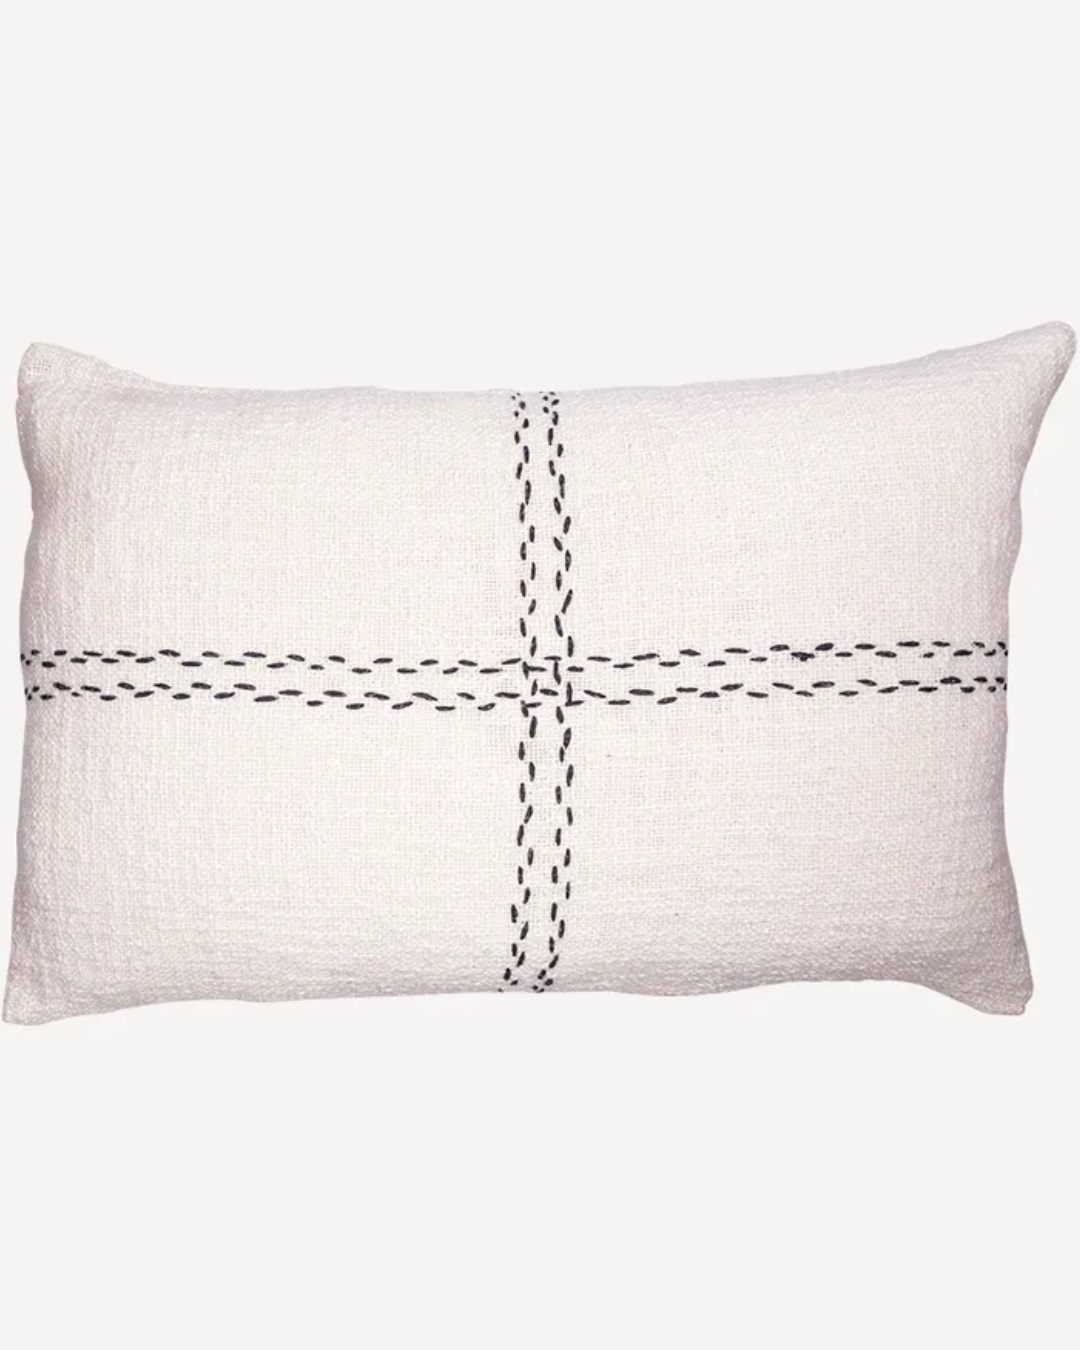 Rectangle white cushion with black cross stitching